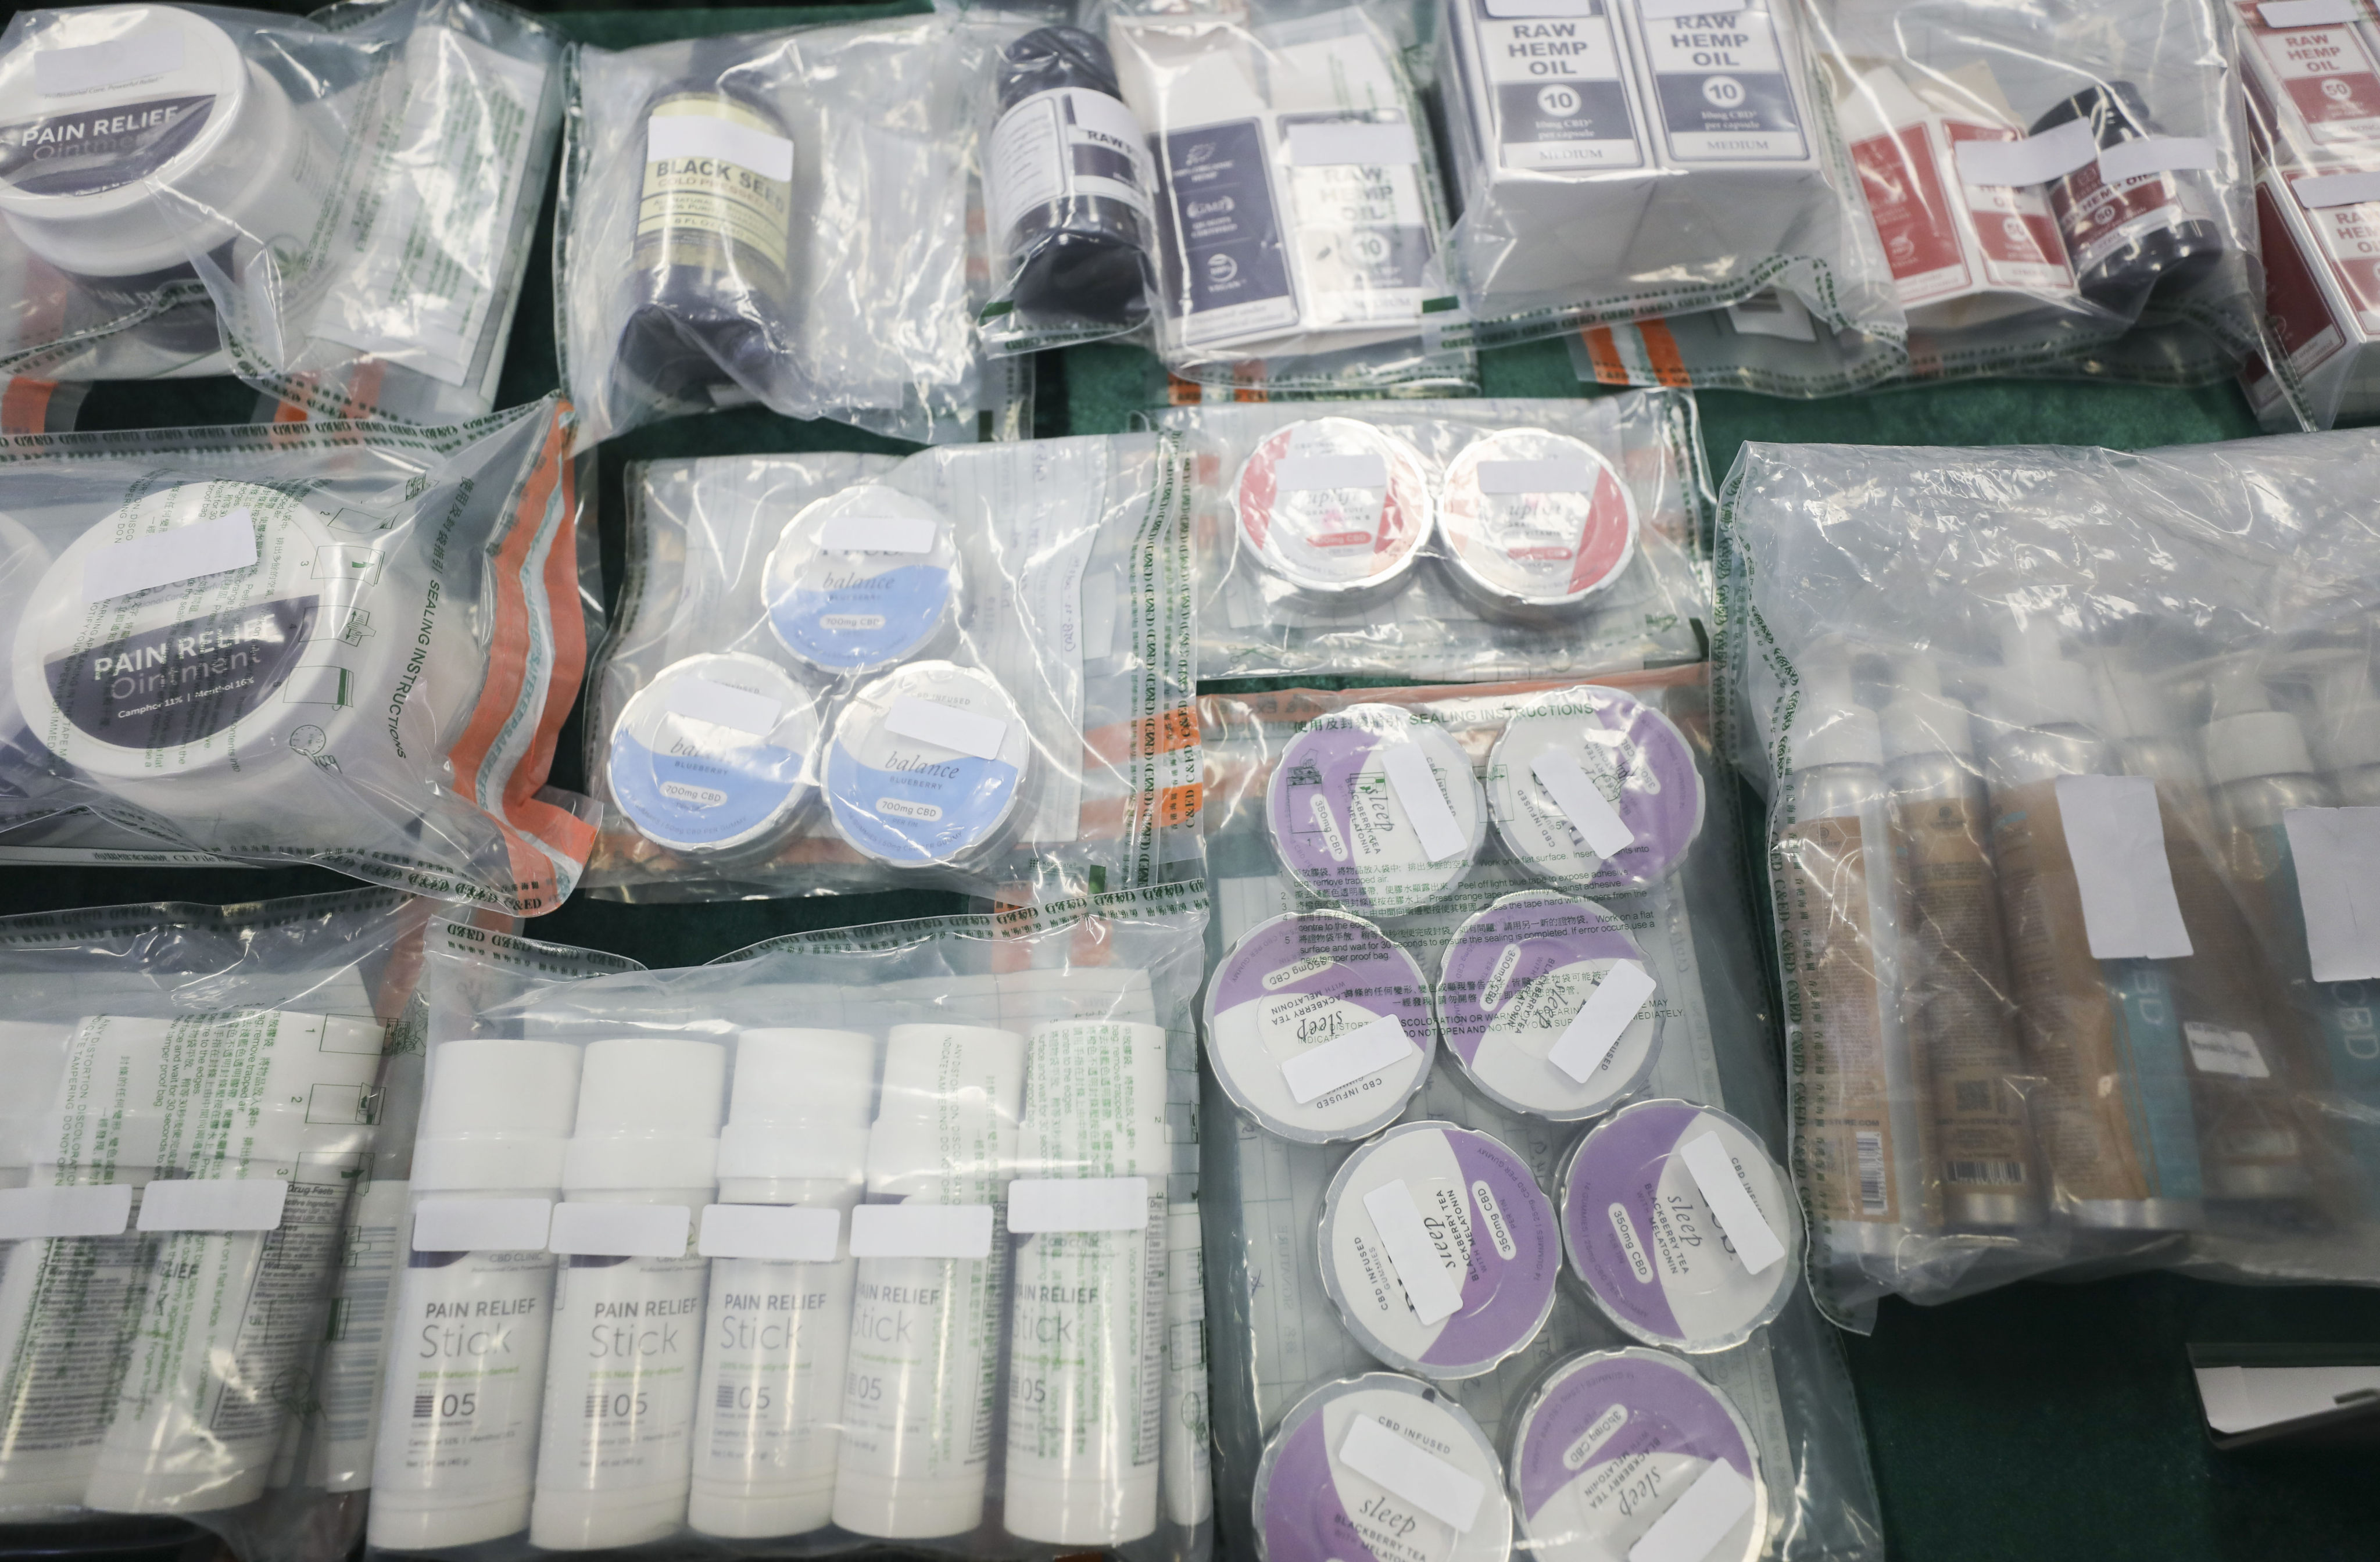 Examples of cannabidiol products are displayed at a press conference on January 27, at the headquarters of the Hong Kong Customs and Excise Department in North Point. Photo: Xiaomei Chen